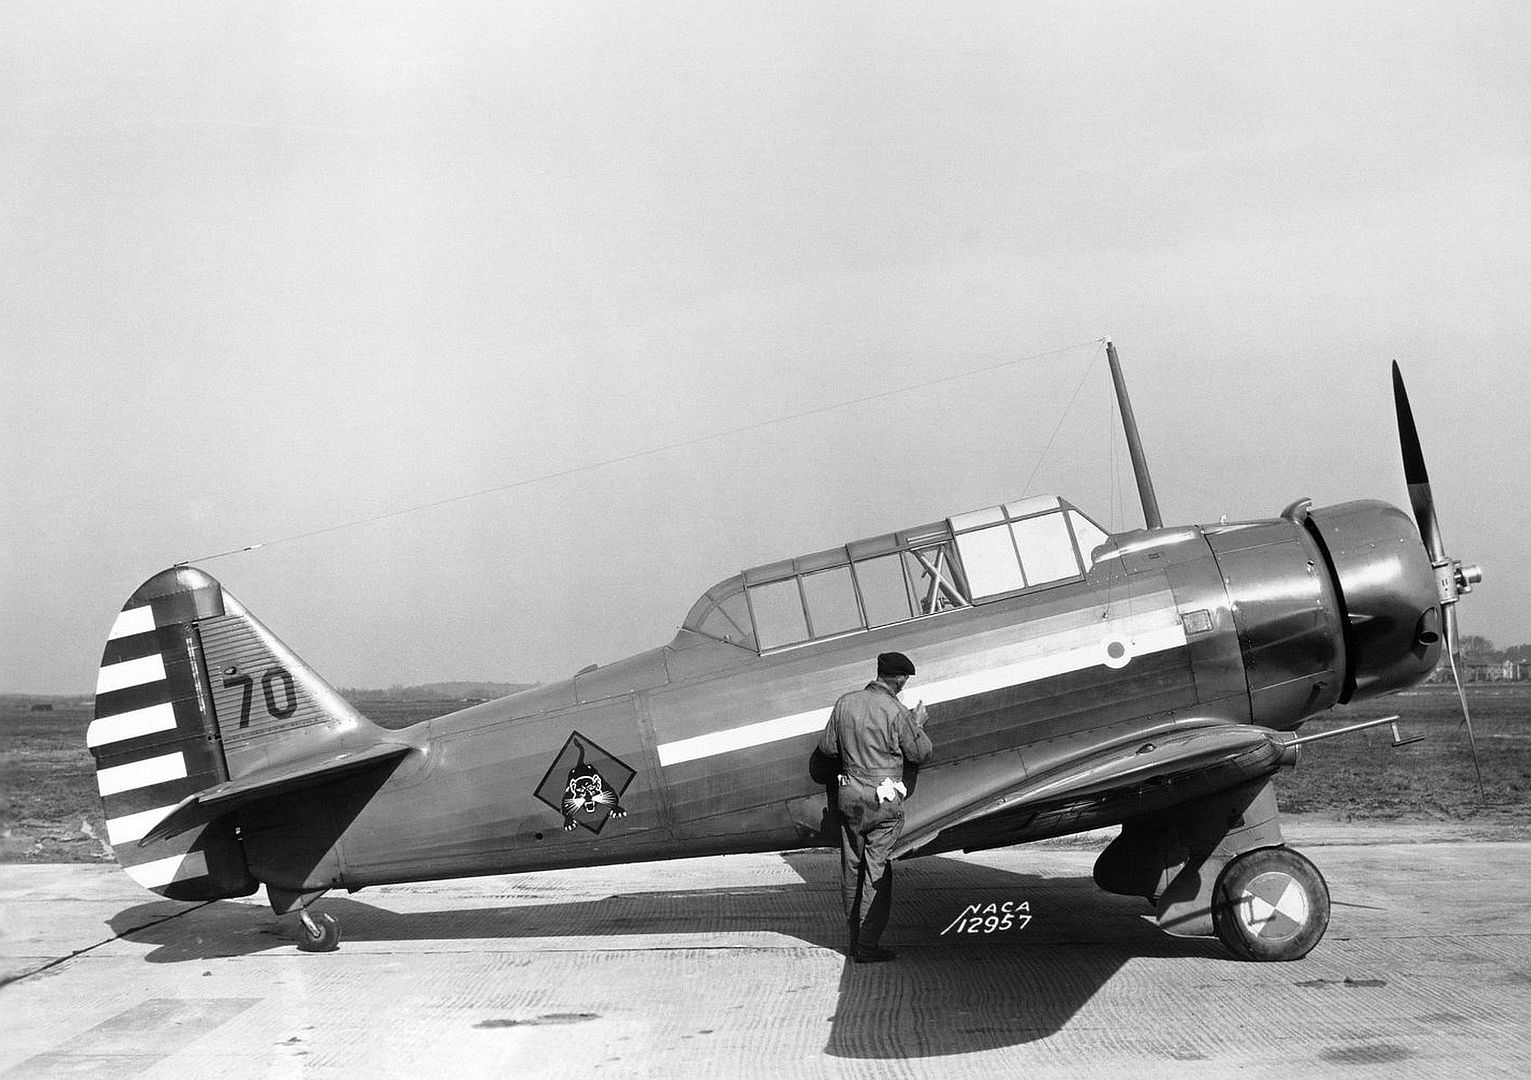 9A Trainer Was Flown At The Langley Memorial Aeronautical Laboratory